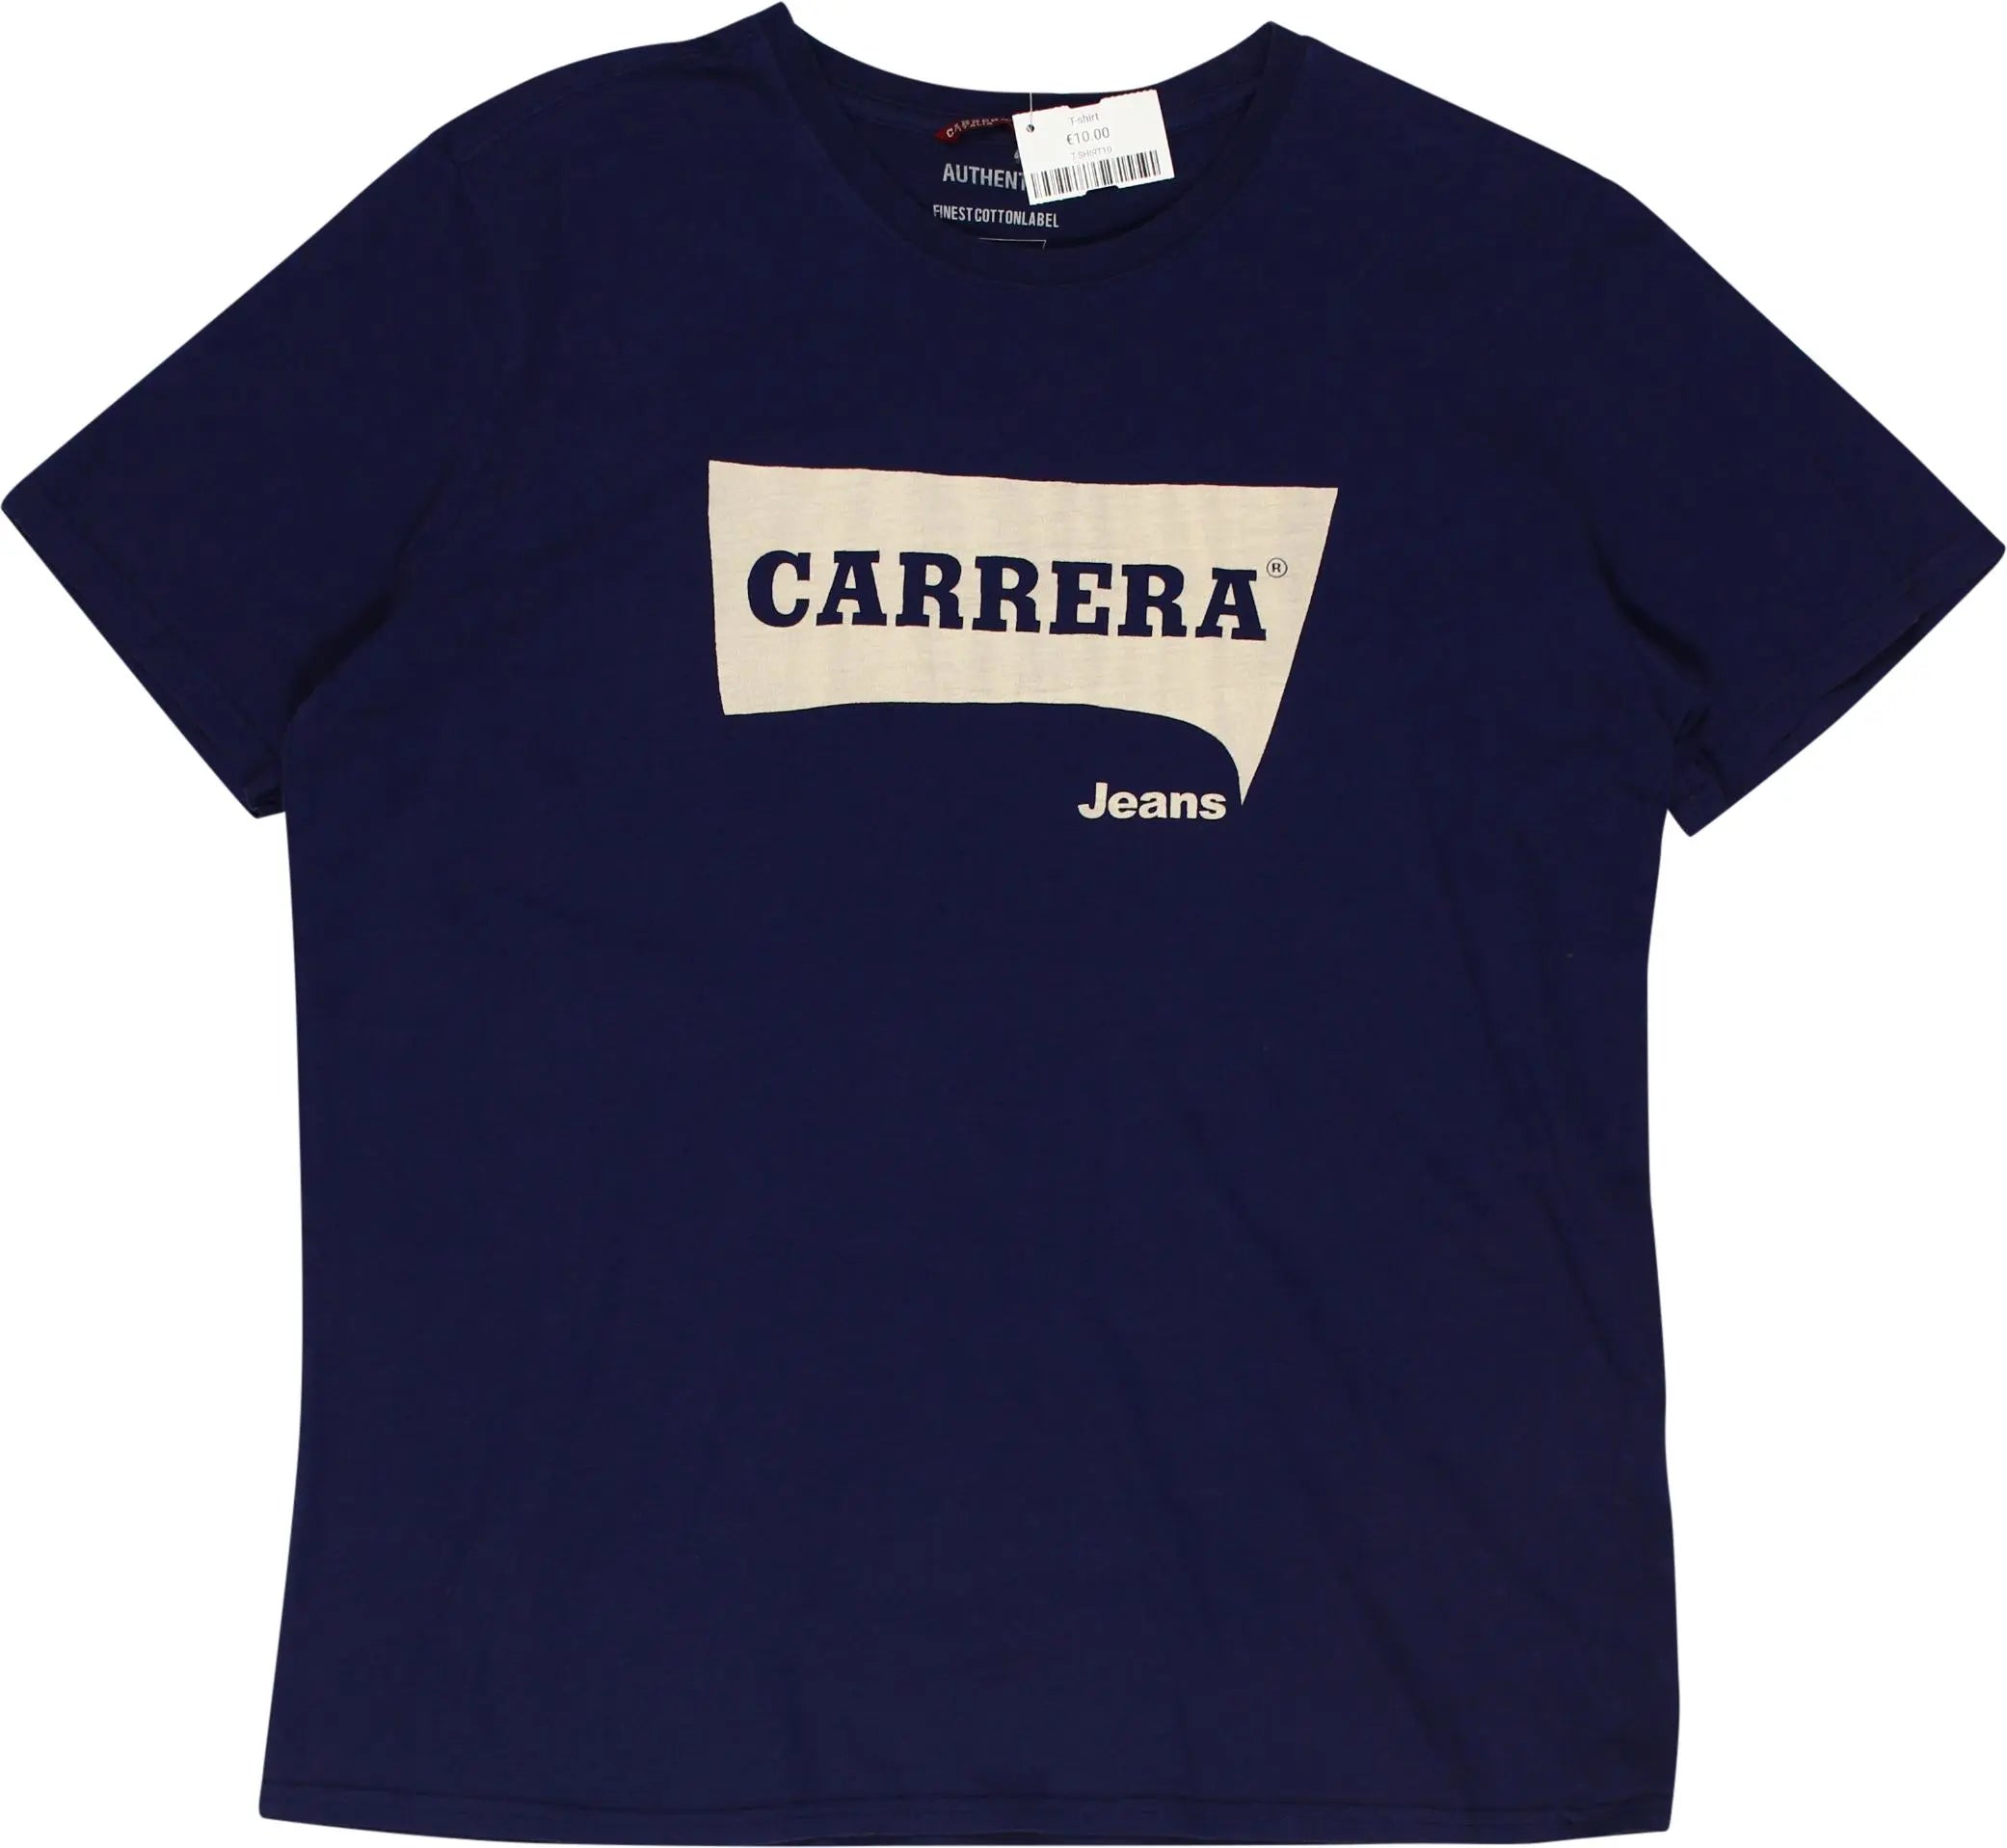 Carrera - Carrera T-shirt- ThriftTale.com - Vintage and second handclothing